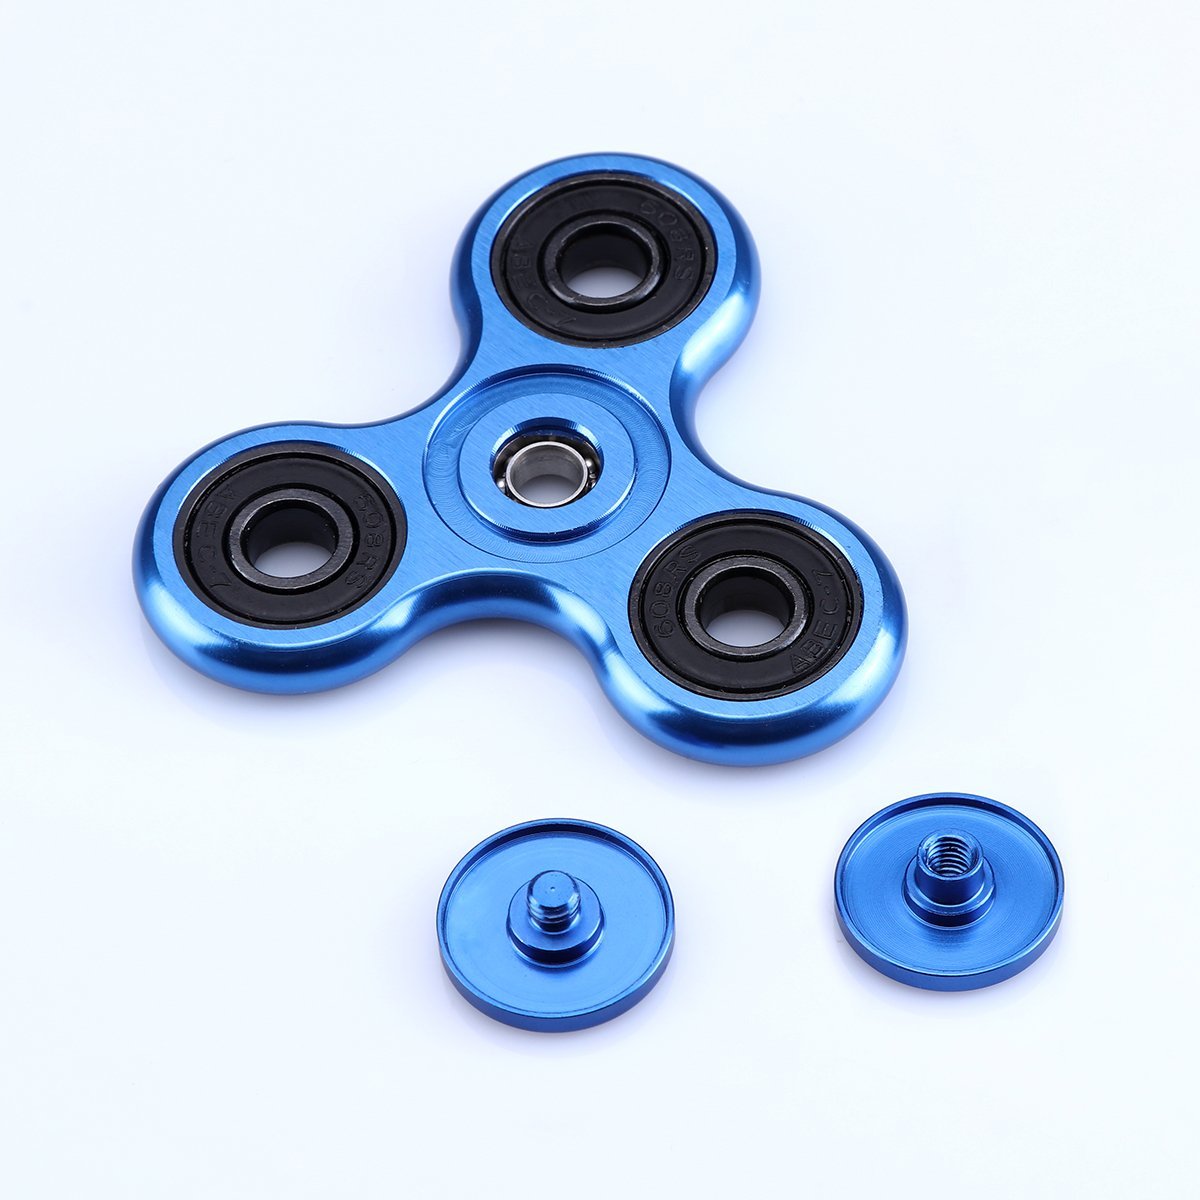 ATESSON Fidget Spinner Toy Ultra Durable Stainless Steel Bearing High Speed 2-5 Min Spins Precision Brass Material Hand spinner EDC ADHD Focus Anxiety Stress Relief Boredom Killing Time Toys